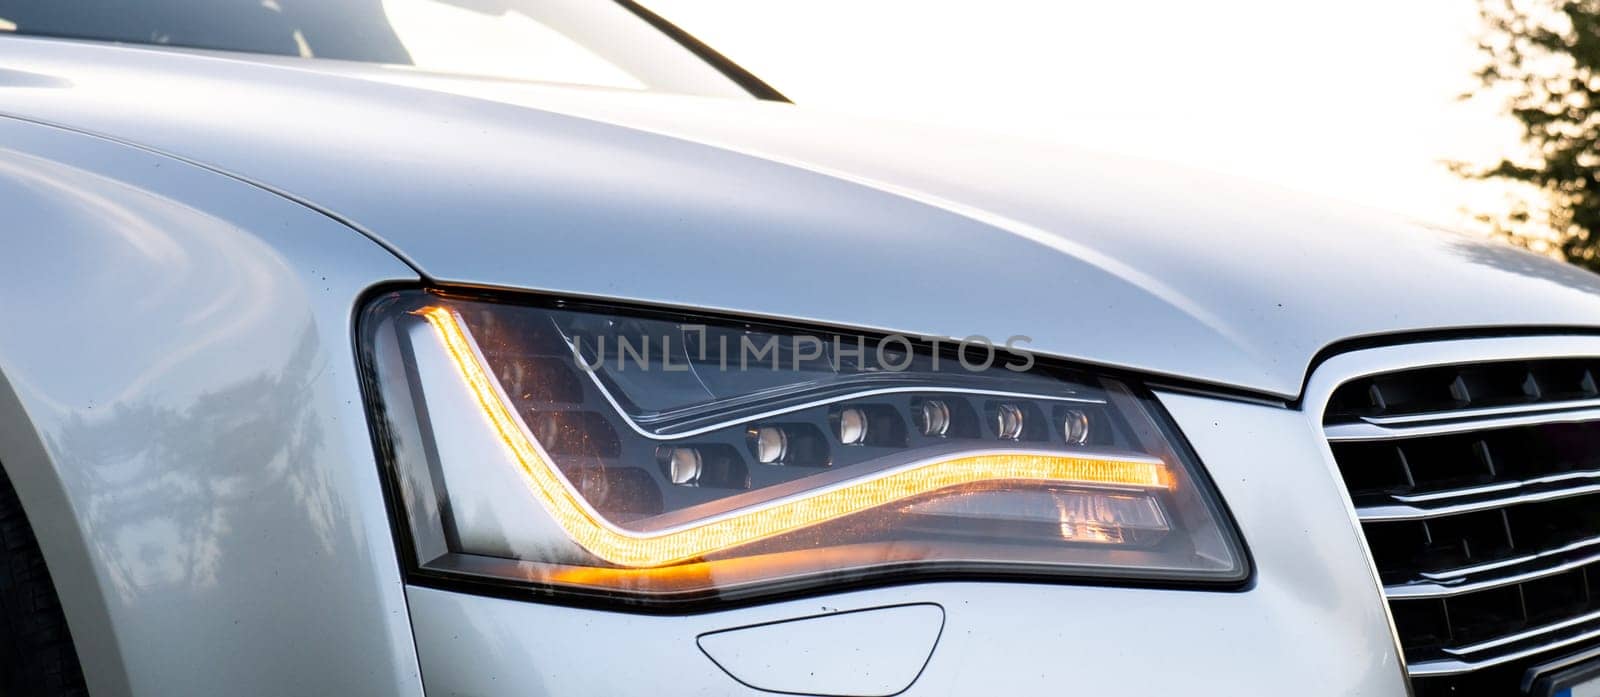 Headlight turned on in Clean car after Washing luxury silver car. Sedan car exterior of modern luxury car during sunset on highway road. Details of front headlamp. Prestige sport automobile